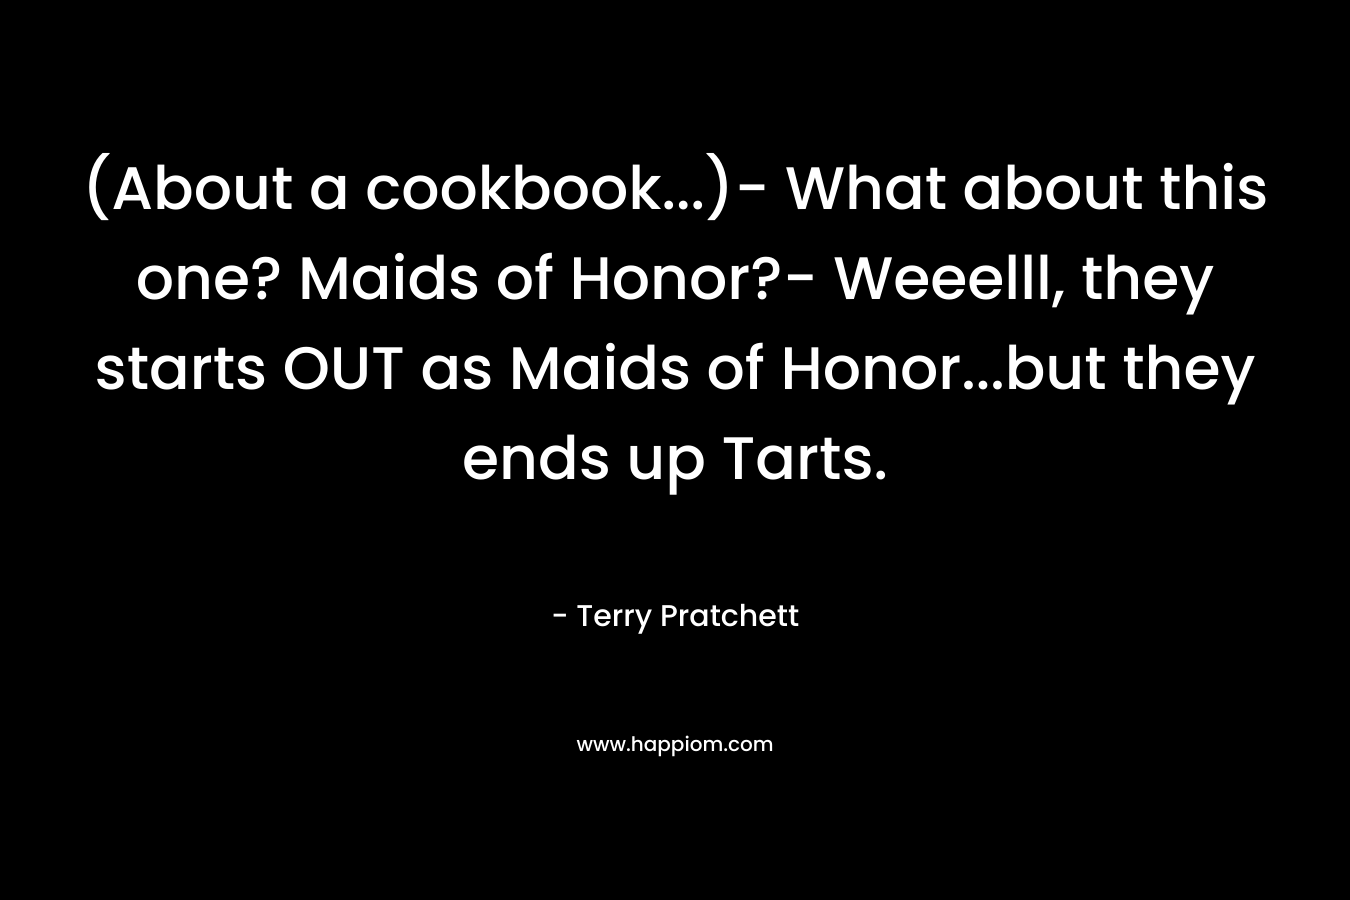 (About a cookbook…)- What about this one? Maids of Honor?- Weeelll, they starts OUT as Maids of Honor…but they ends up Tarts. – Terry Pratchett